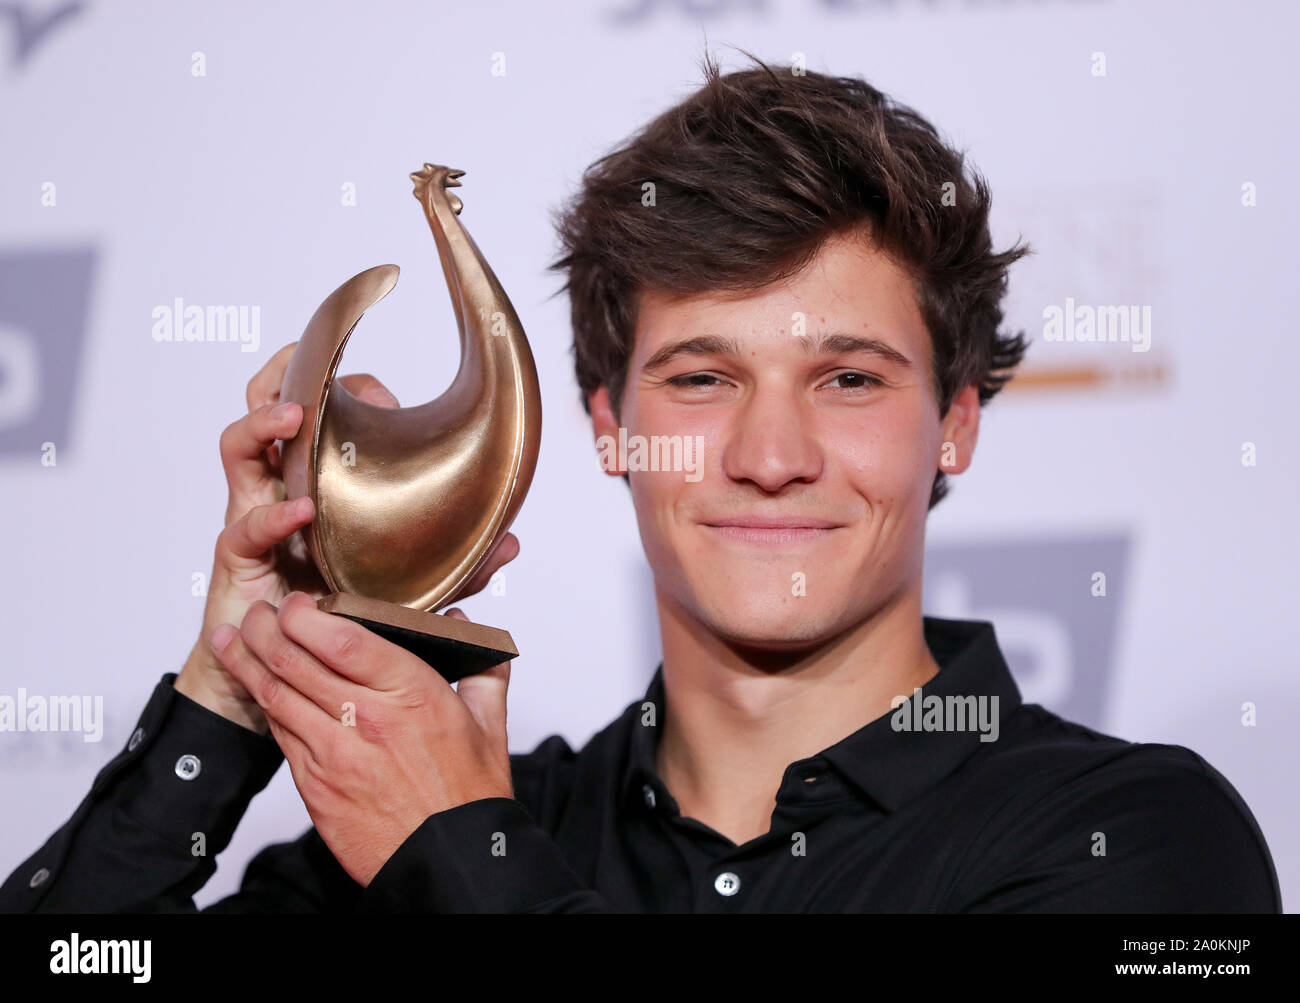 Leipzig, Germany. 20th Sep, 2019. Wincent Weiss, singer, comes after his award with the 'Golden Henne' to a photo session. A total of 53 nominees from show business, society and sport can hope for the award. The Golden Hen is dedicated to the GDR entertainer Hahnemann, who died in 1991. Credit: Jan Woitas/dpa-Zentralbild/dpa/Alamy Live News Stock Photo